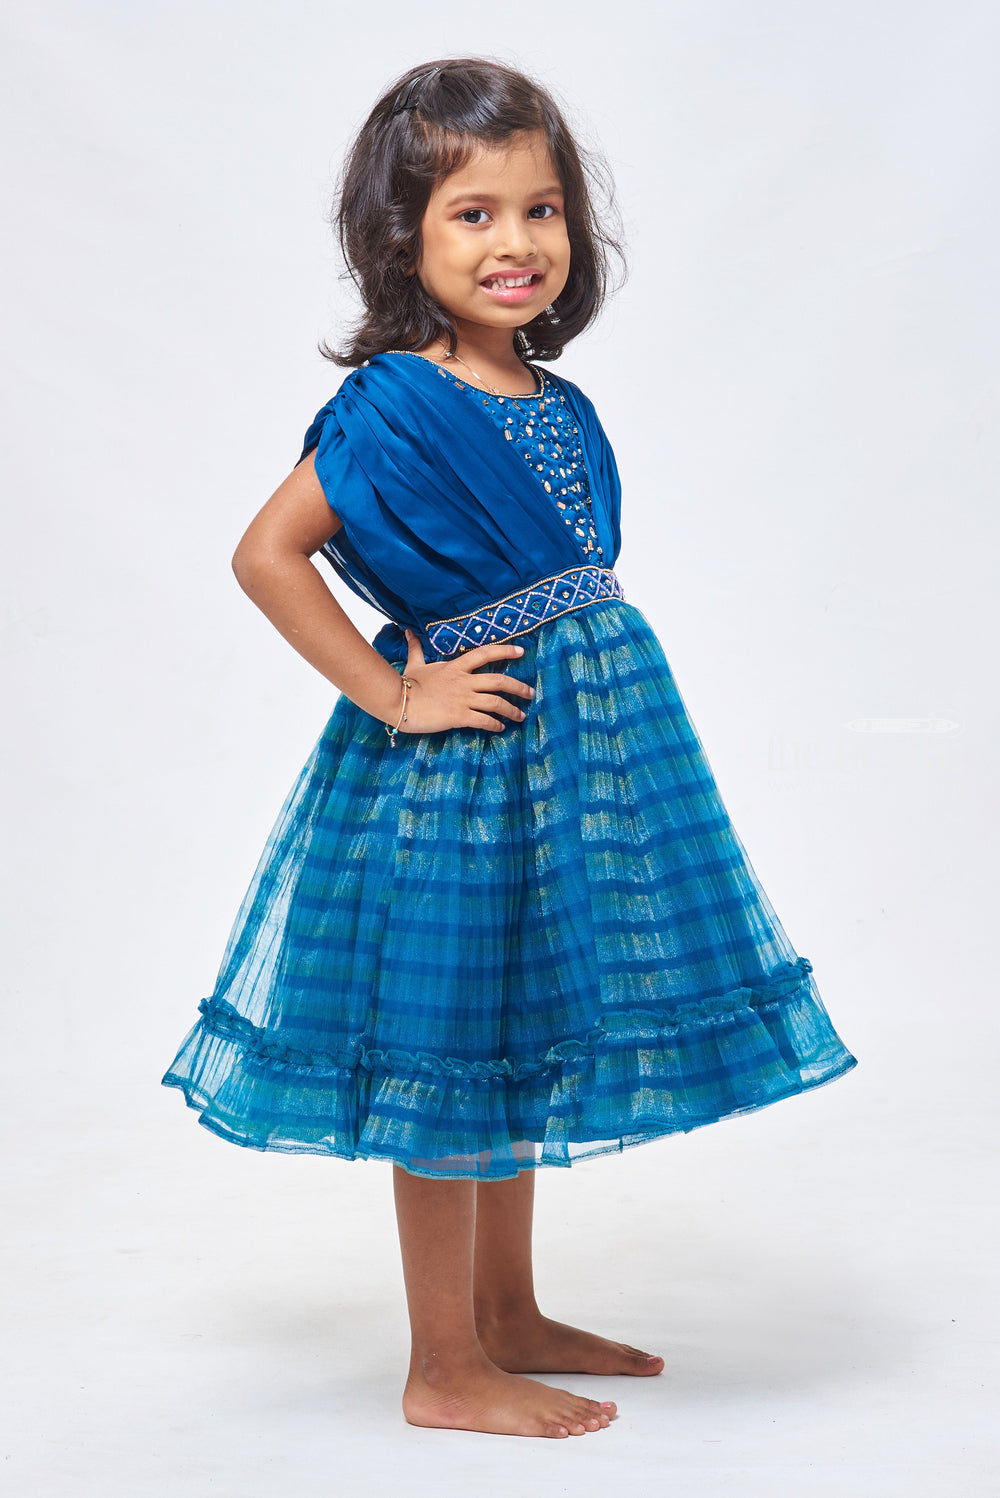 The Nesavu Girls Fancy Party Frock Dazzling Blue Gala Frock for Girls: Adorned with Rhinestones & Reflective Mirror Accents Nesavu 1YEAR Old Baby Girl Birthday Frock | Baby Birthday Dress | the Nesavu